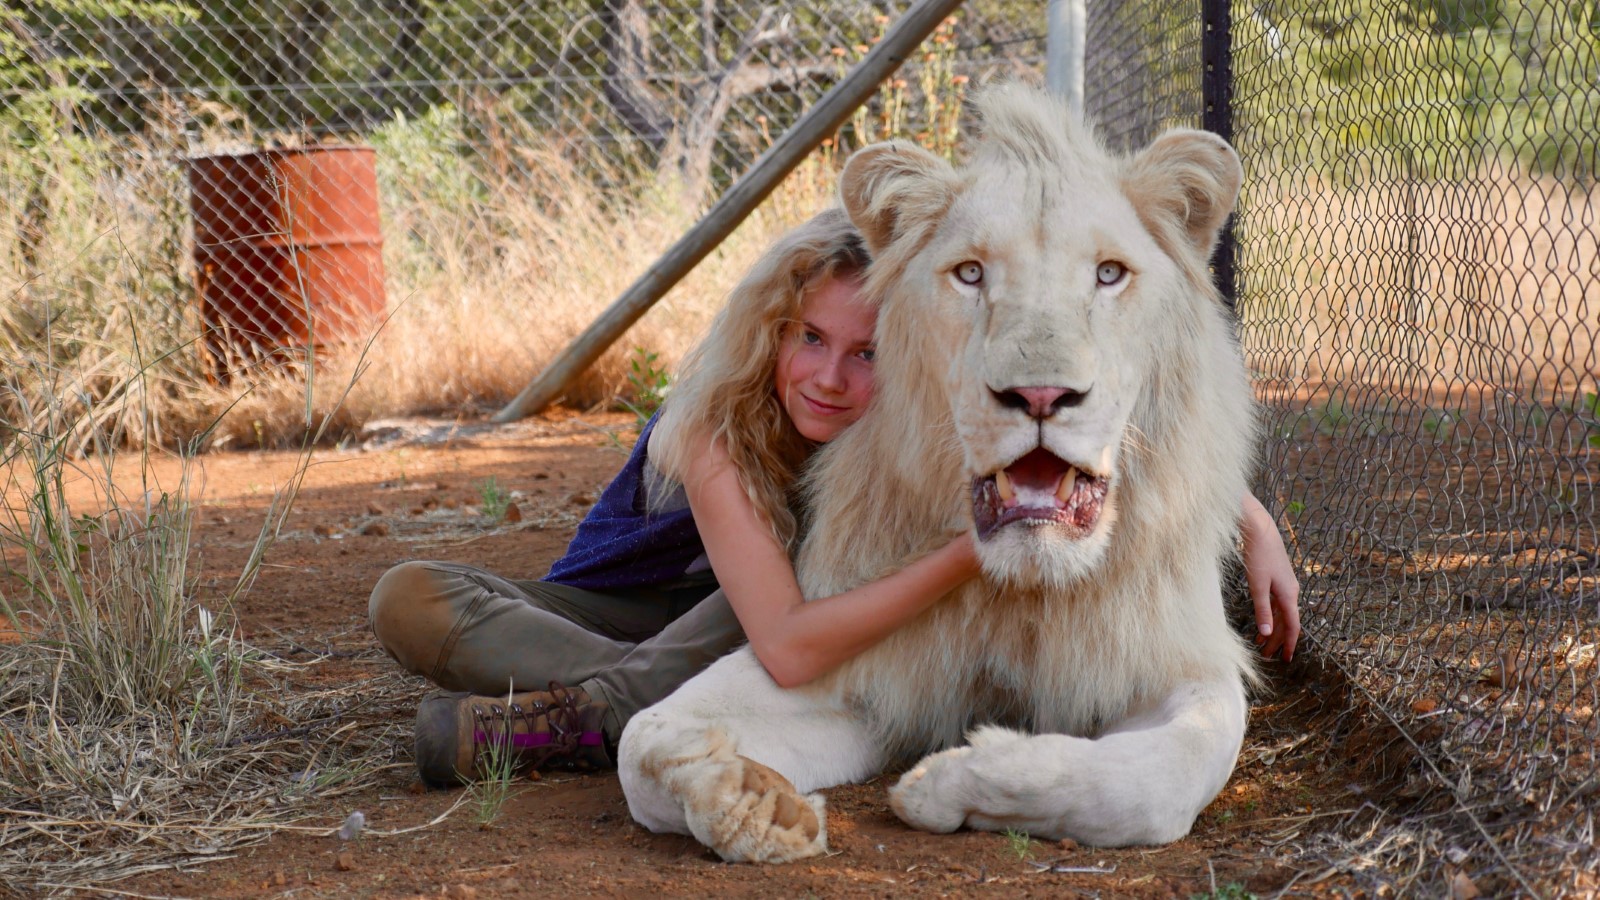 Watch Mia and the White Lion